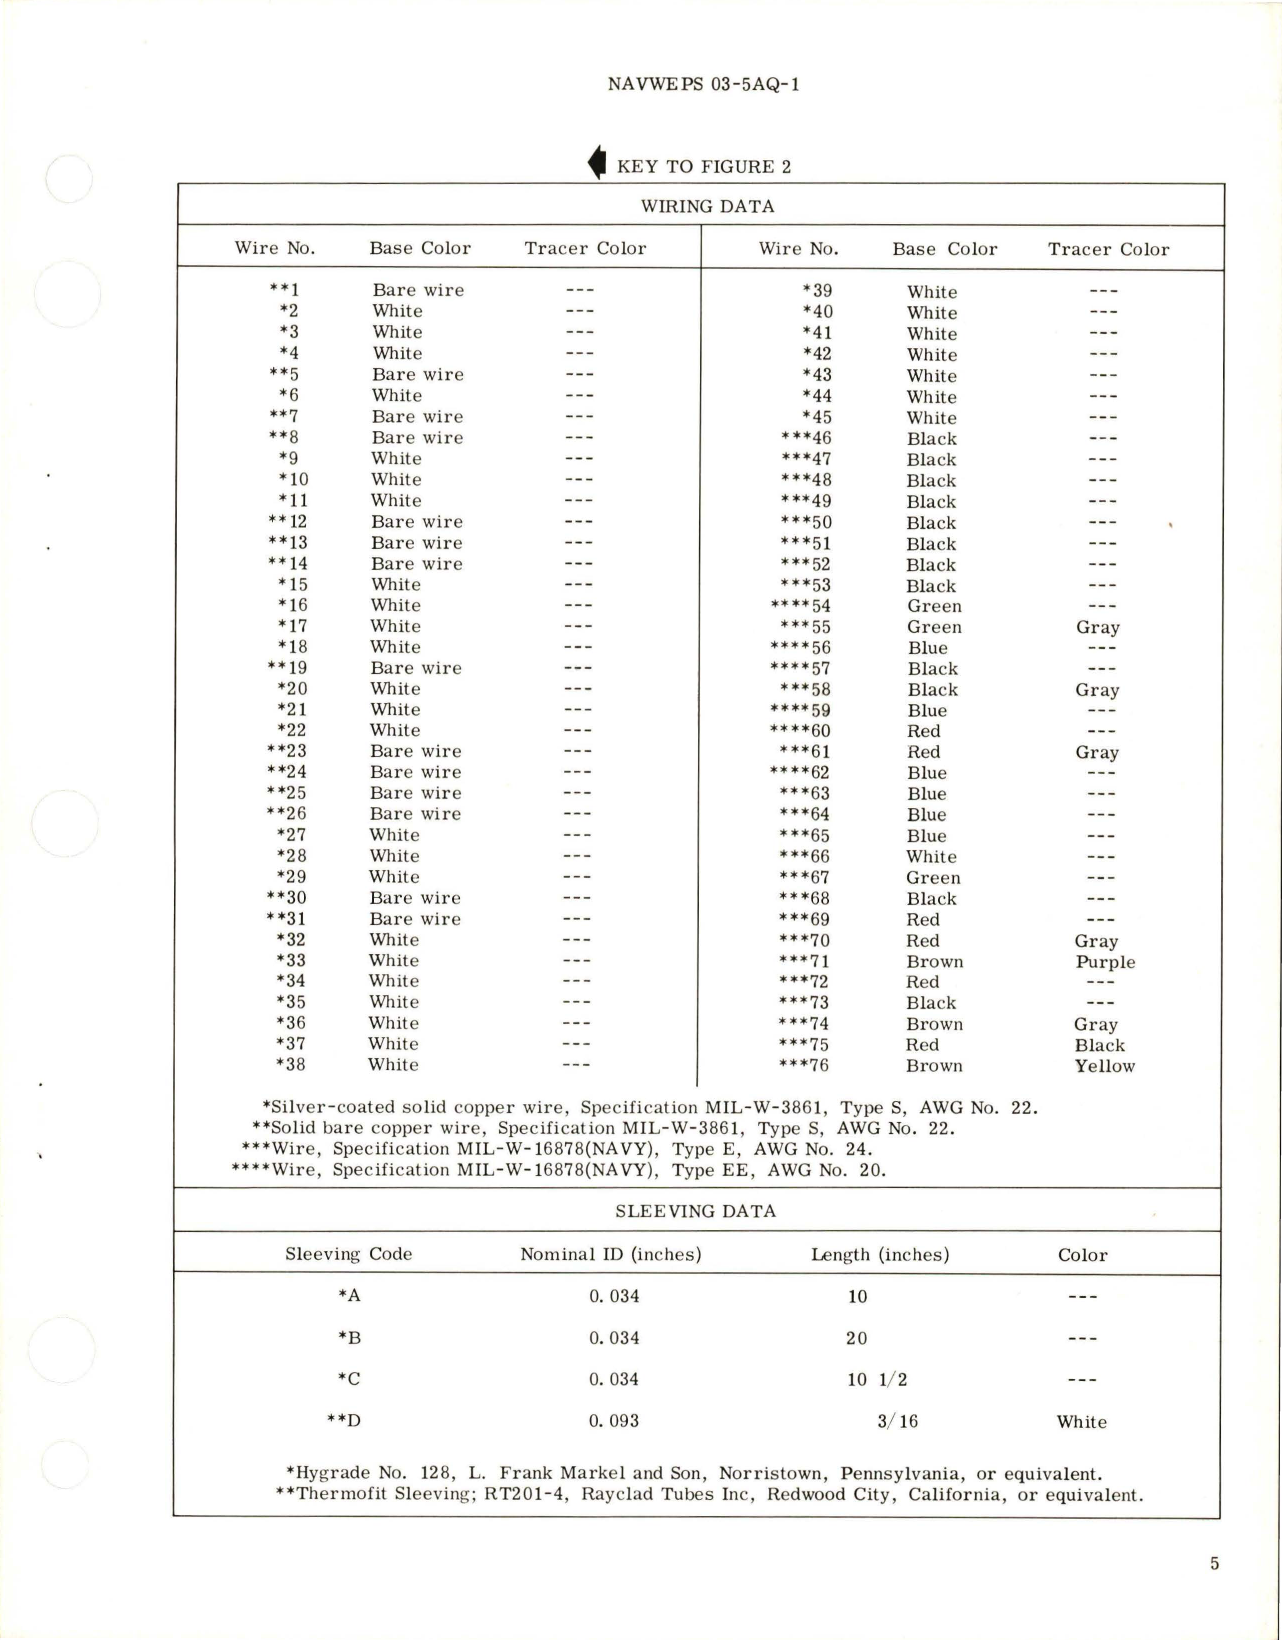 Sample page 7 from AirCorps Library document: Overhaul Instructions with Parts Breakdown for Voltage Regulator - Part 548052-3-1